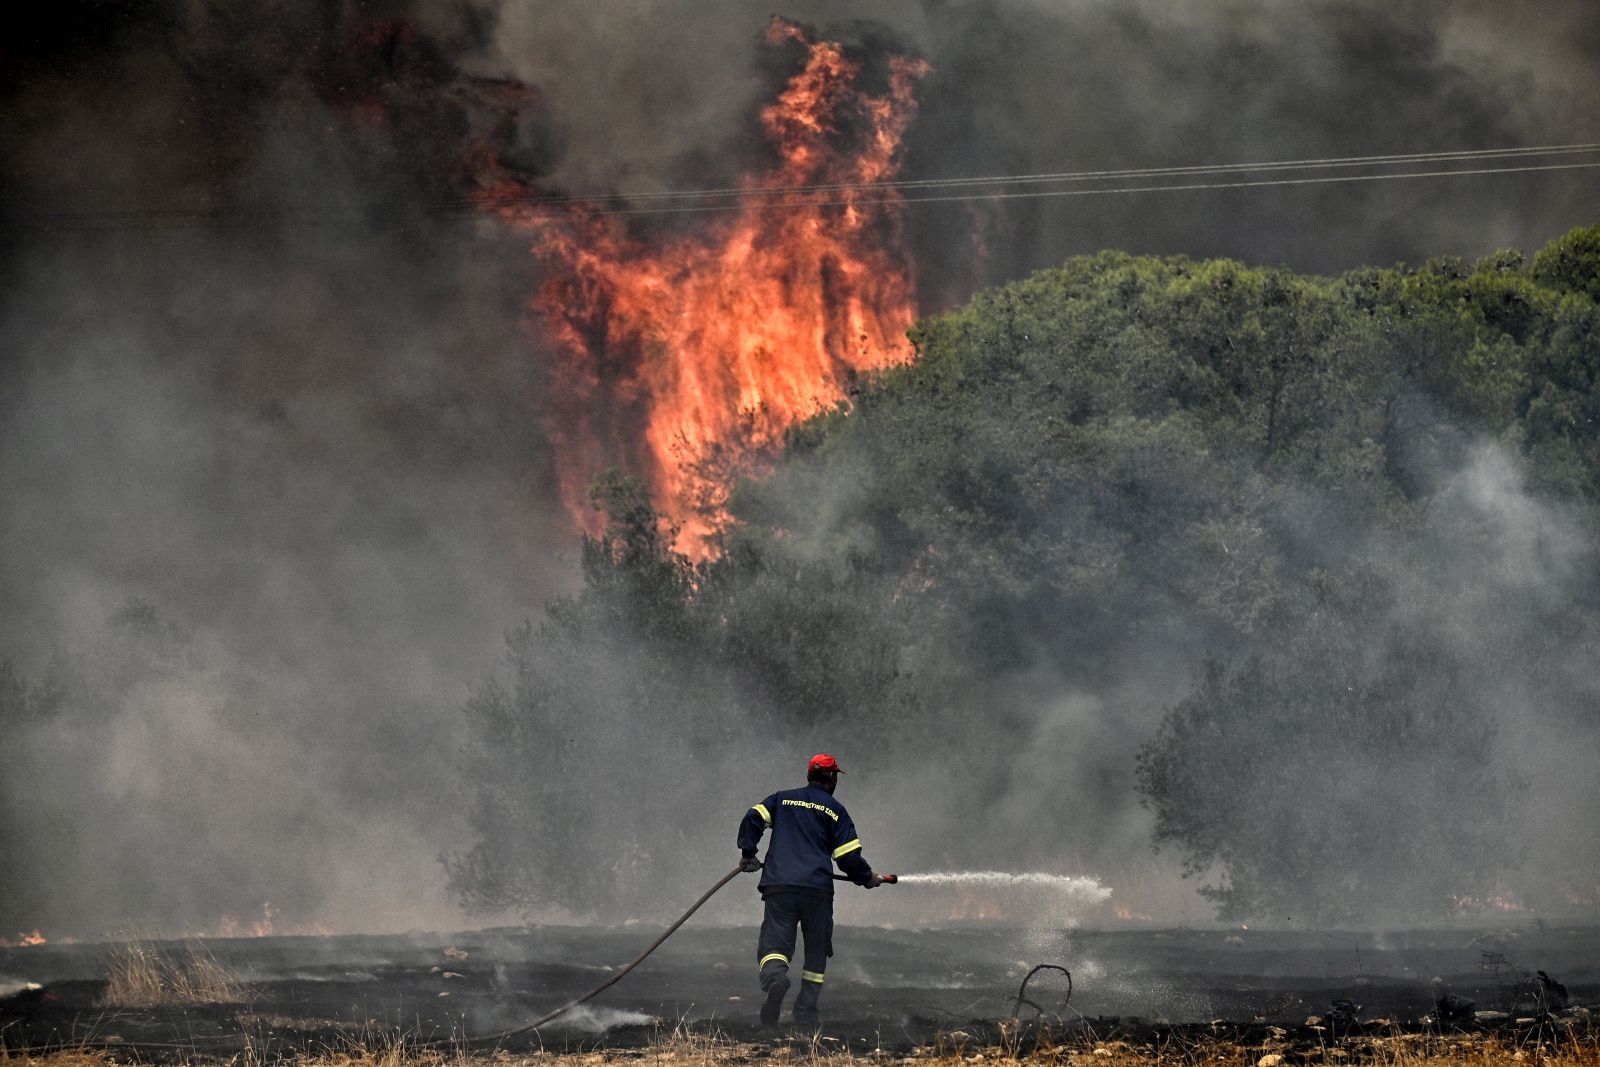 epa10753862 A firefighter operates during a wildfire at Aghios Charalambos area in Loutraki, Corinth, Greece, 18 July 2023. The Fire Brigade recommended the precautionary evacuation of the settlements Aghios Charalambos and Panorama in Loutraki. The fire front was burning over the Kallithea location and moving south-southeast above the Athens-Corinth national highway.  EPA/VASILIS PSOMAS